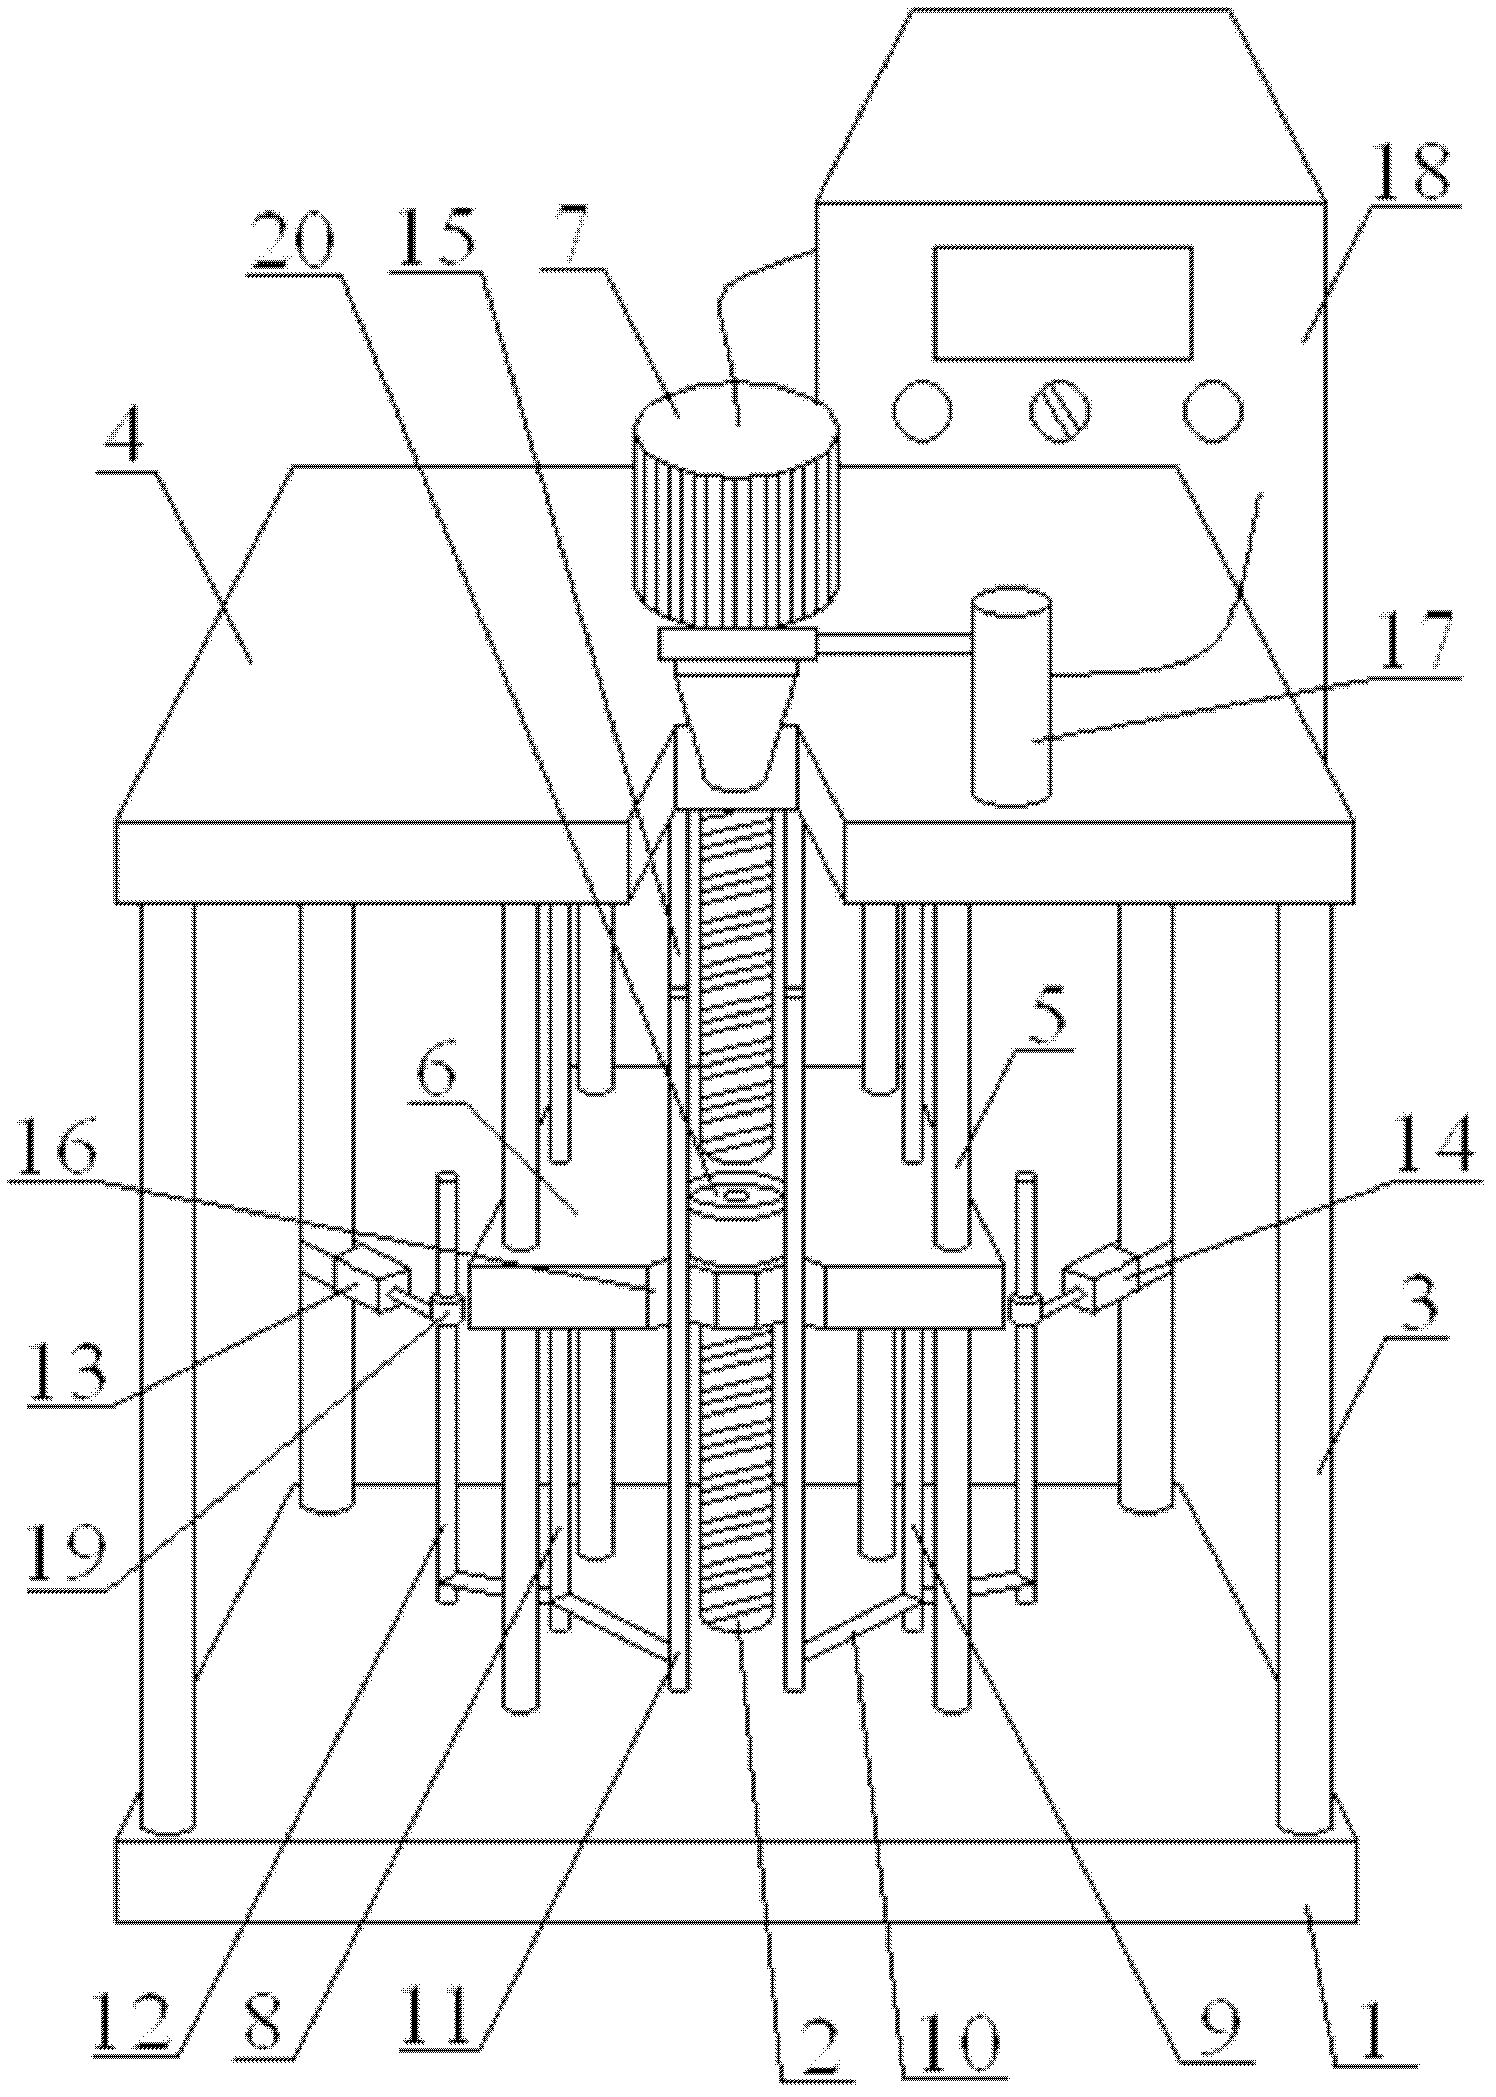 Welding device for air-conditioning cross-flow fans